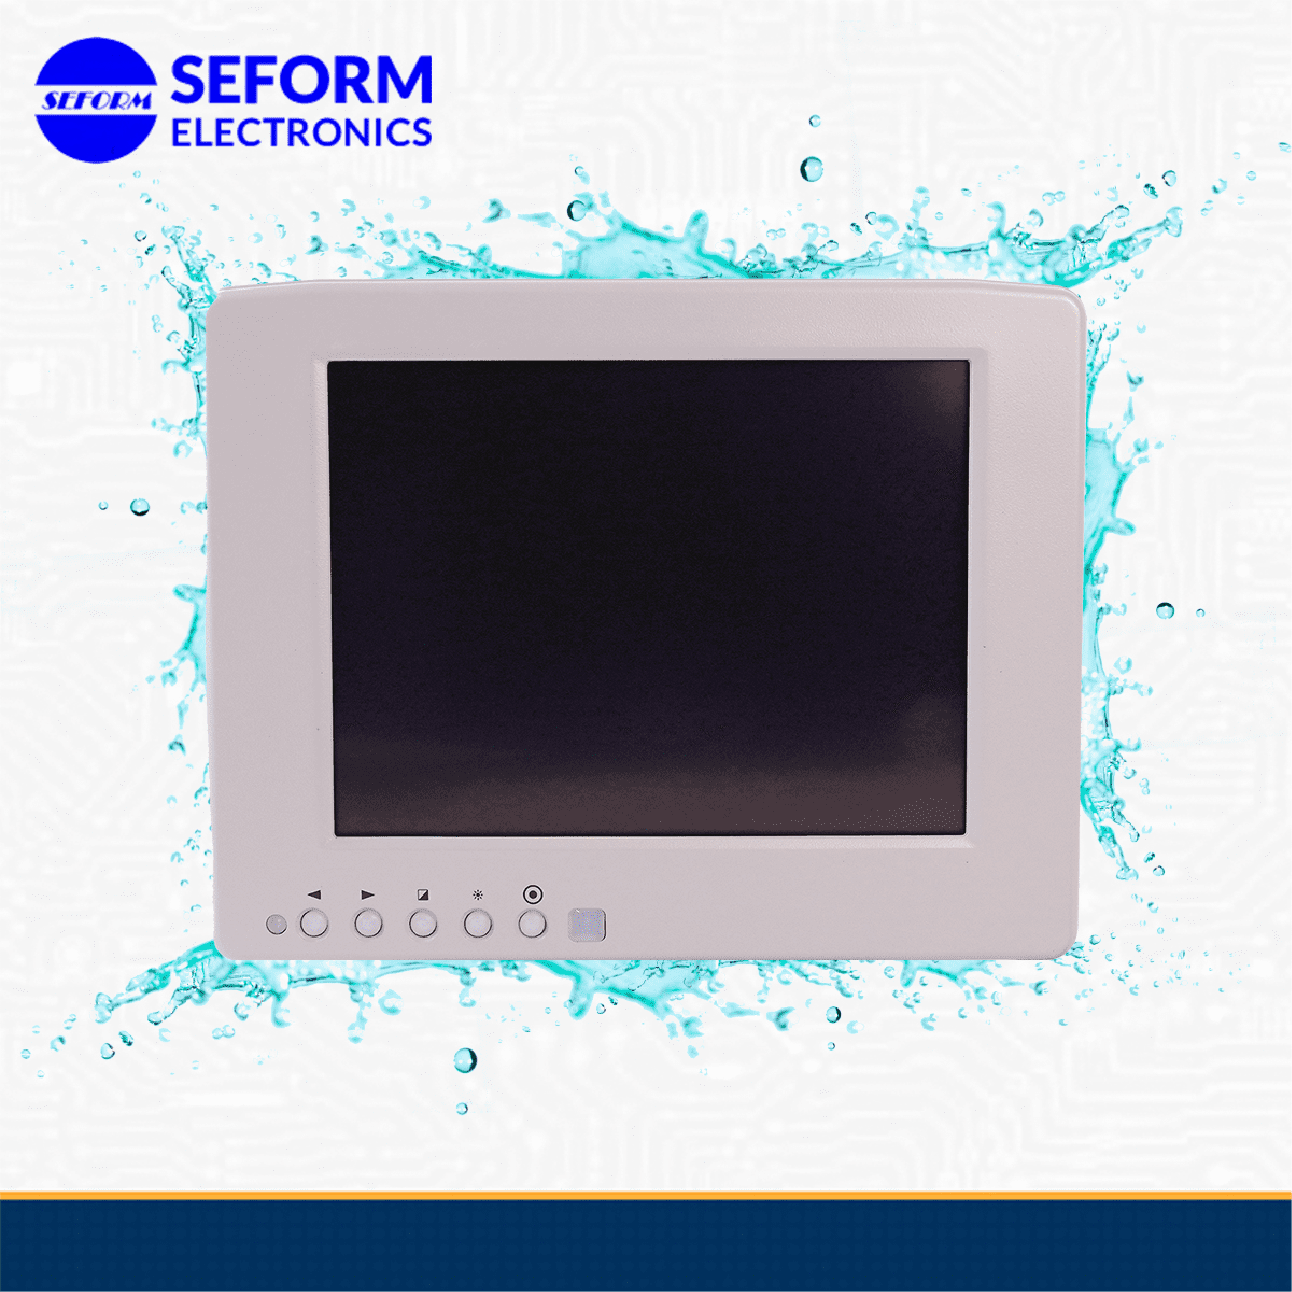 SEW800TPC-UB is an industrial touch monitor which can be used to any kinds of vehicles.